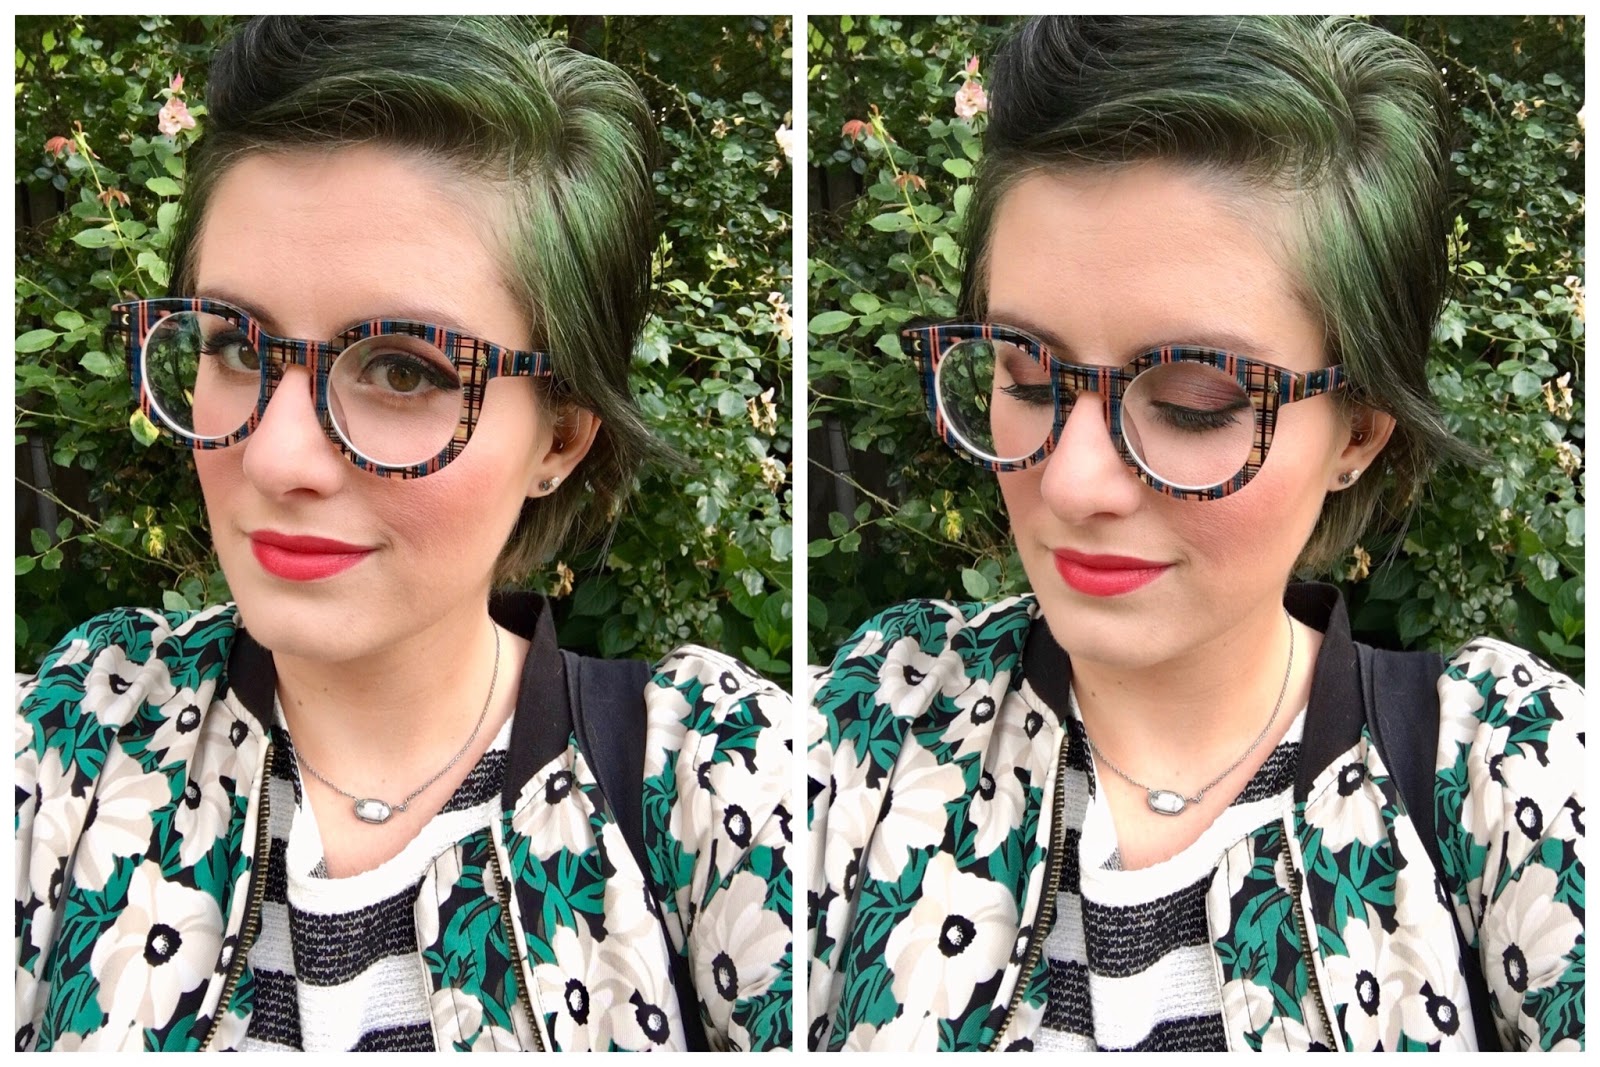 behind the leopard glasses: with green hair, a real weirdo